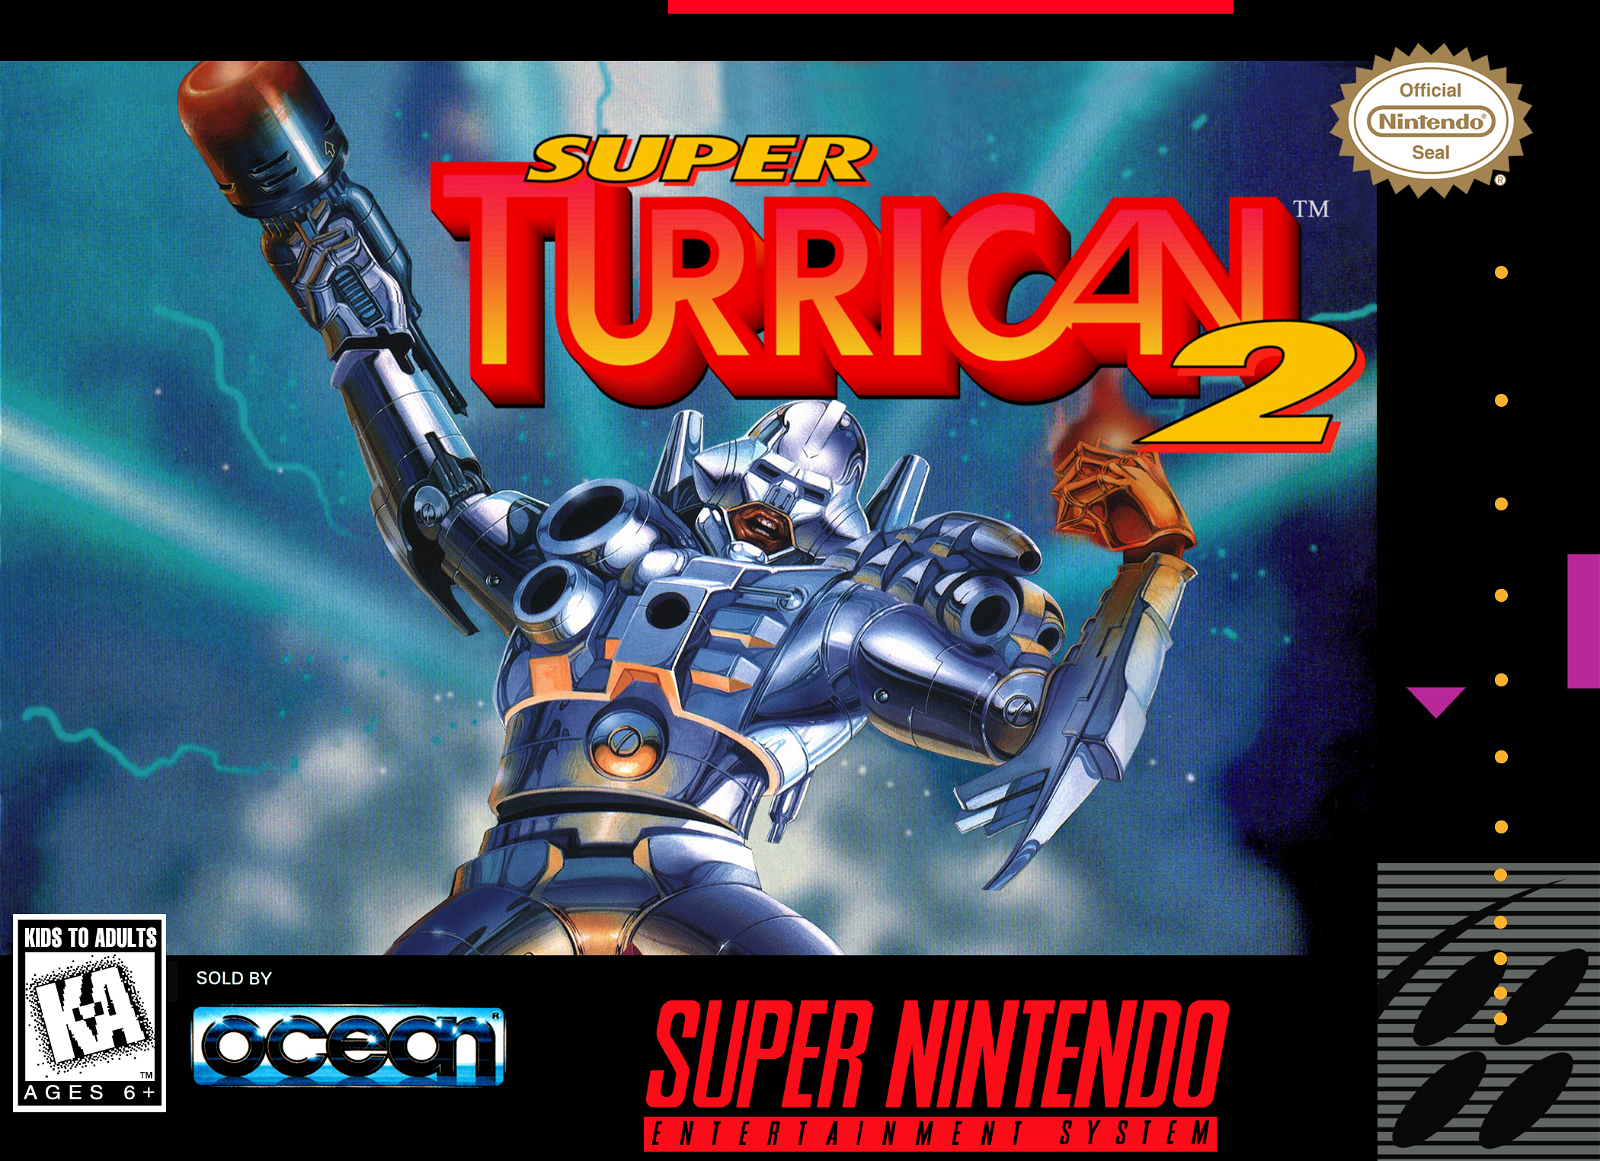 Image of Super Turrican 2